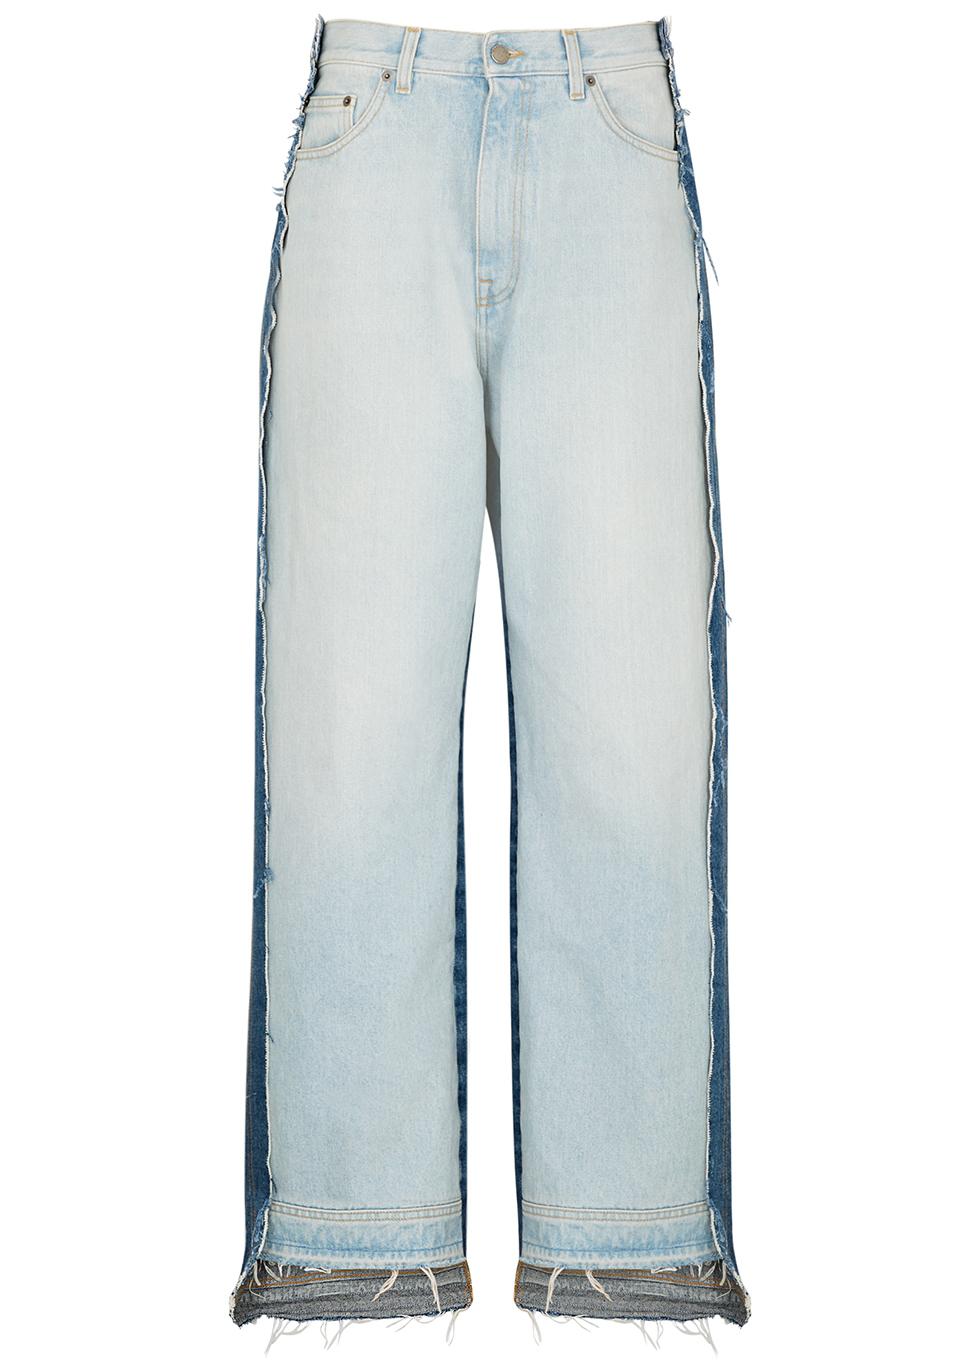 The 50/50 panelled wide-leg jeans by DARKPARK